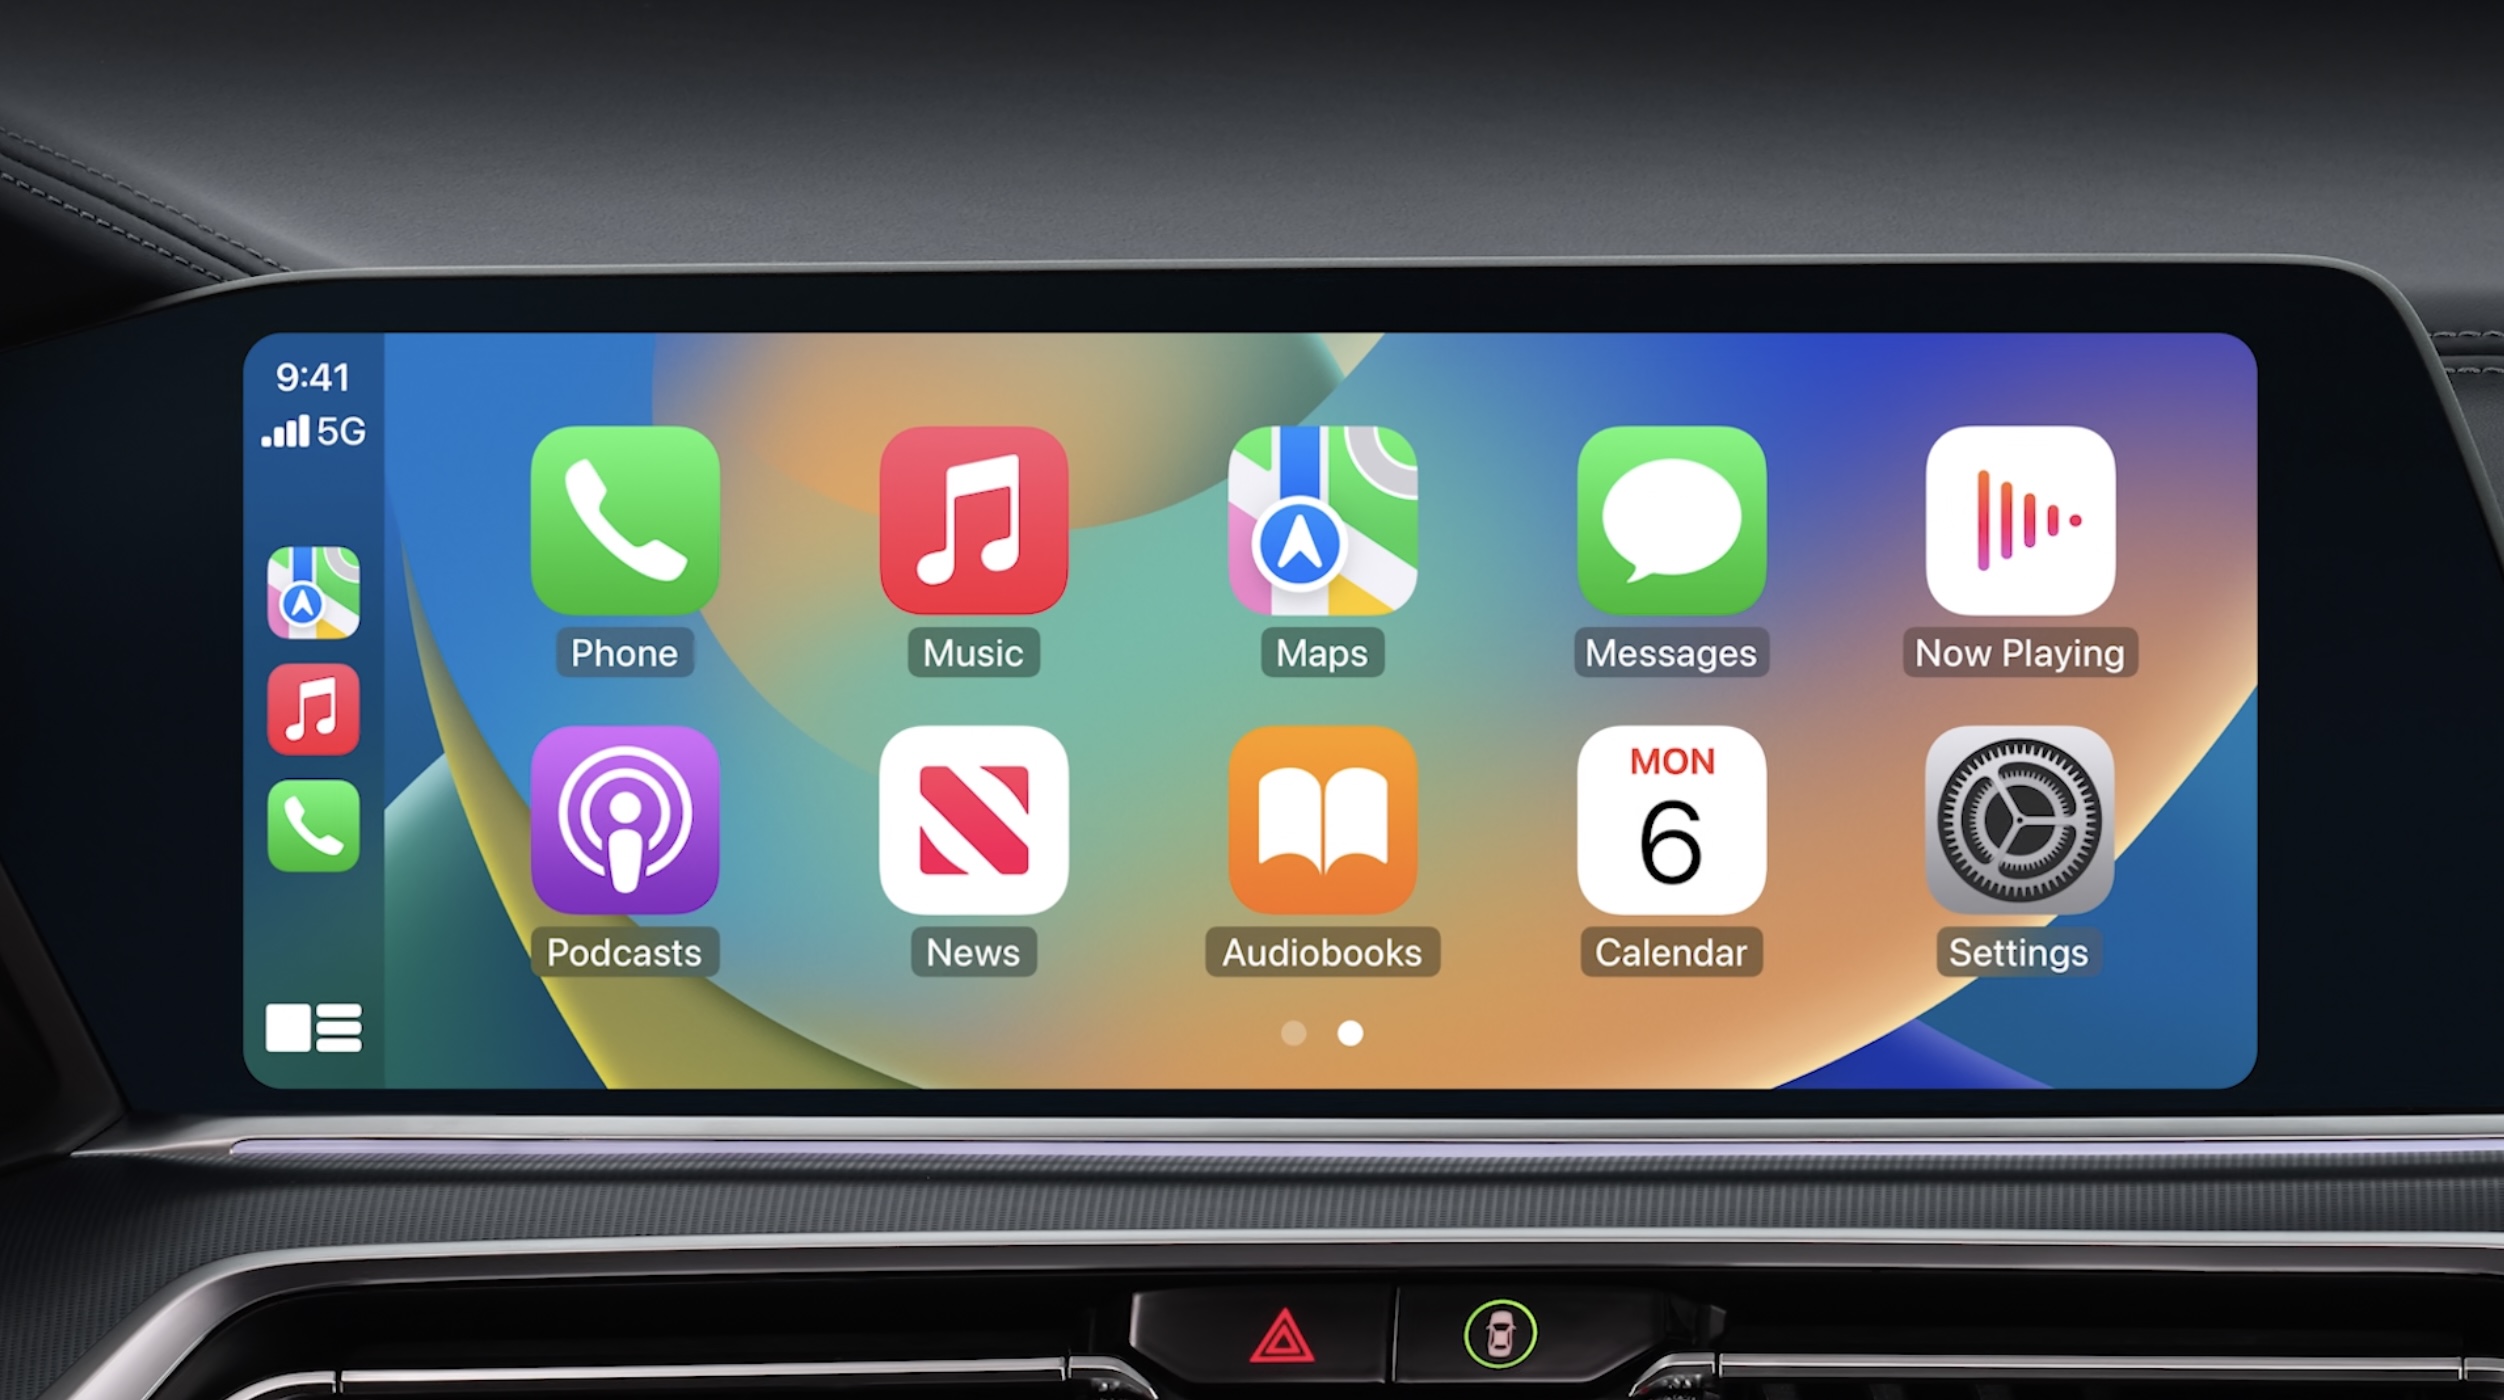 GM is ditching CarPlay in all future EVs and teaming up with Google instead  - 9to5Mac